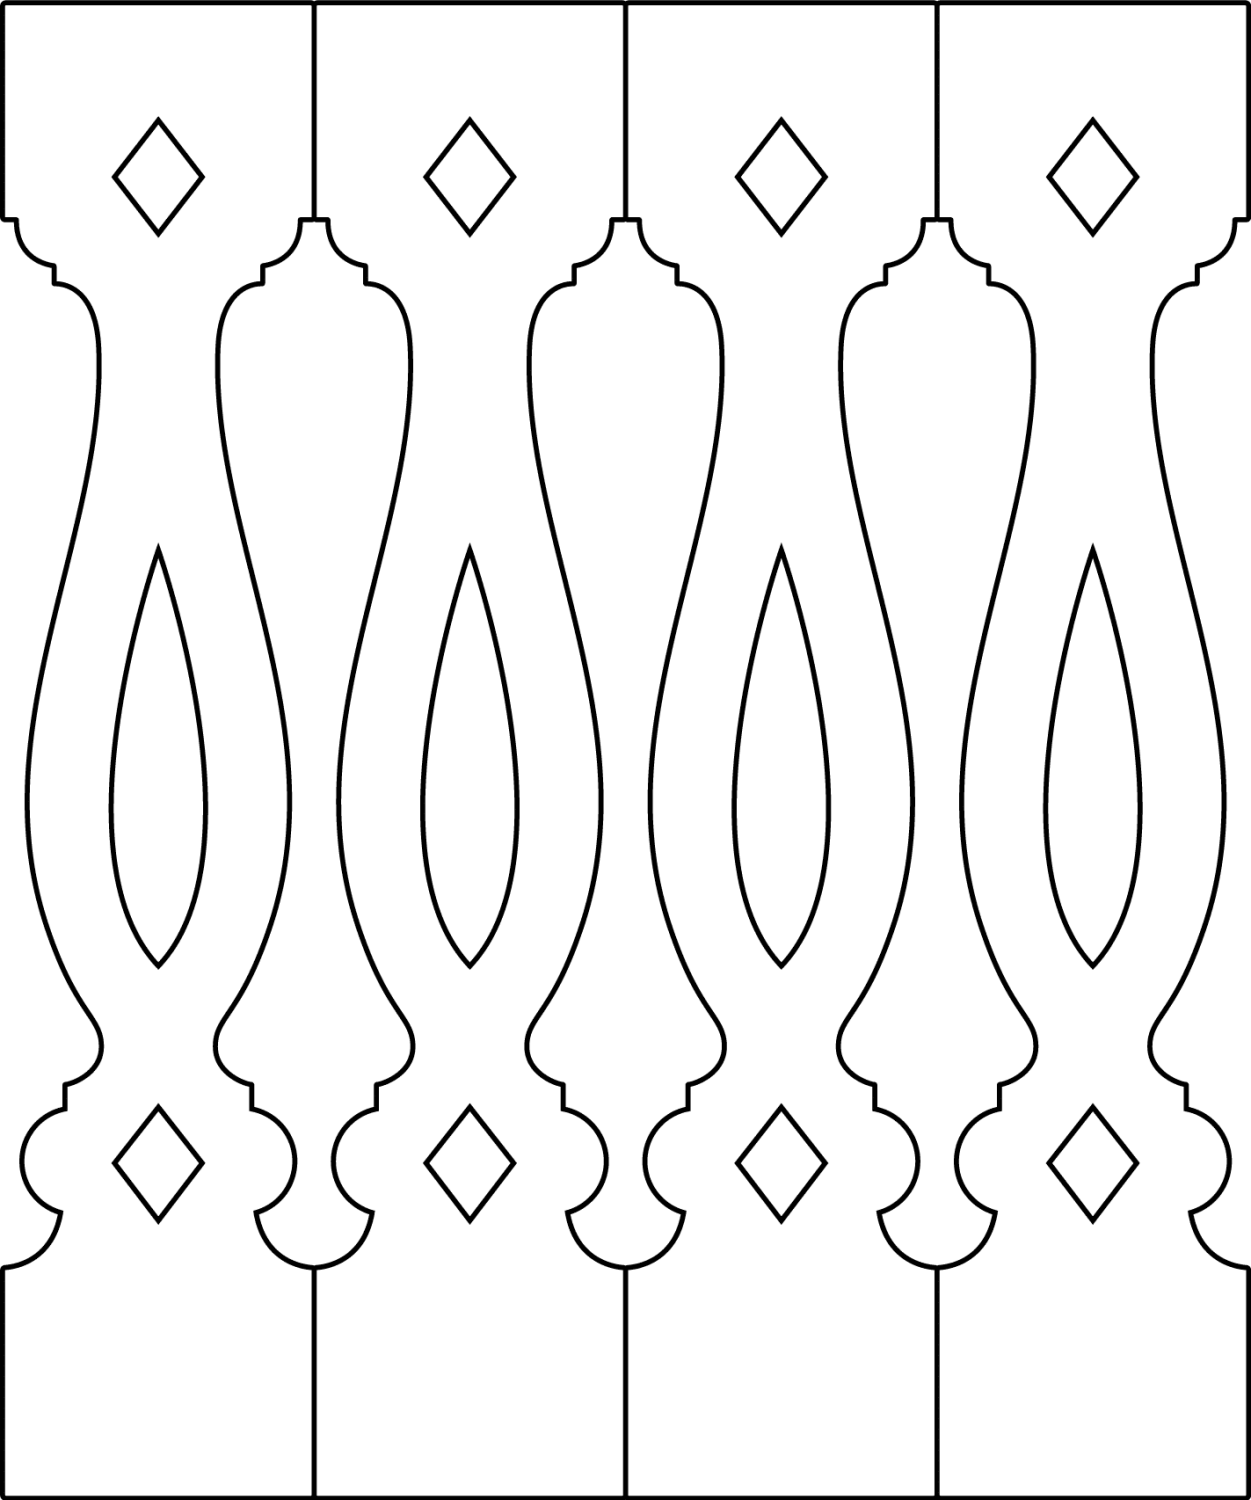 Baluster 046 - The drawing shows 4 Decorative victorian sawn balusters & pickets together